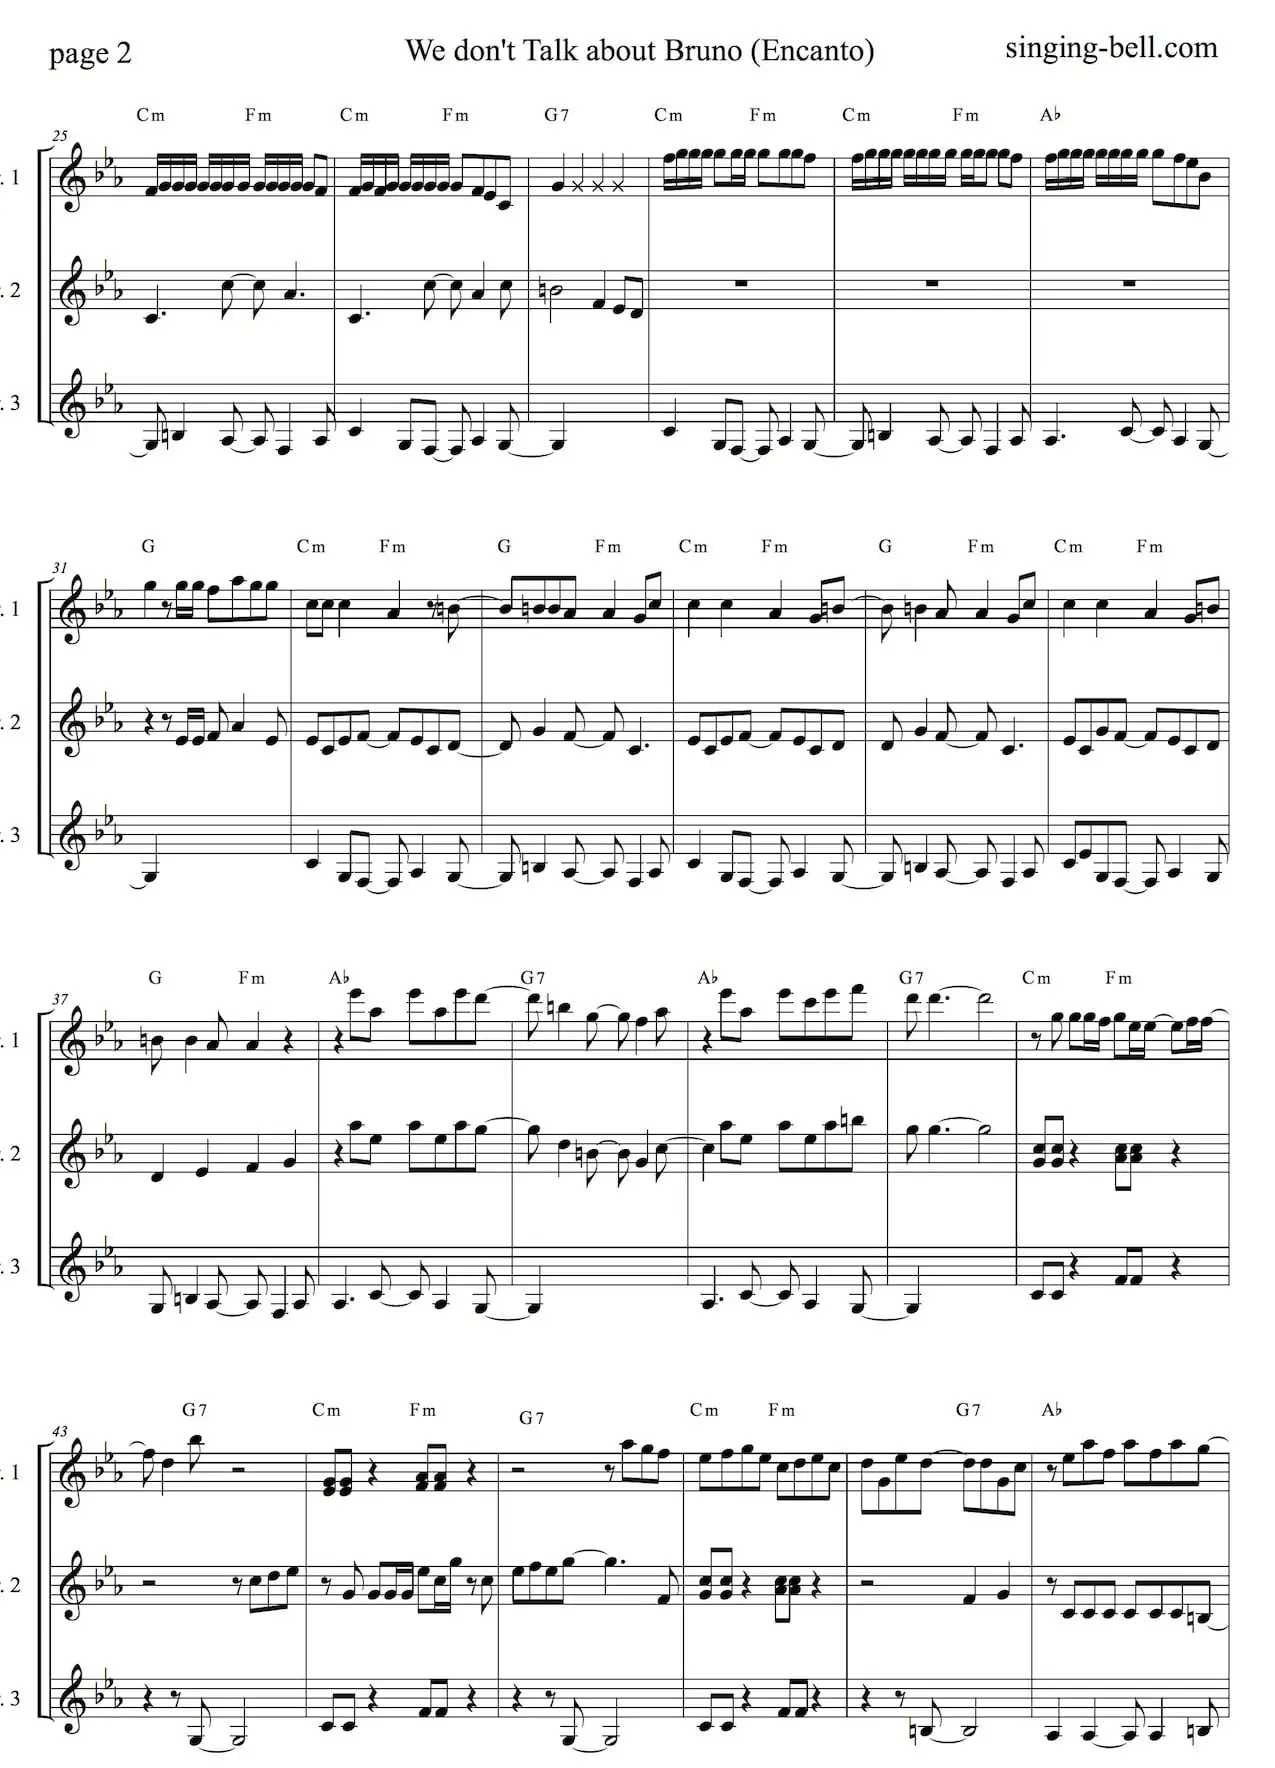 We Don't Talk About Bruno Encanto easy Guitar Trio Sheet Music Notes in Cm - page 2.